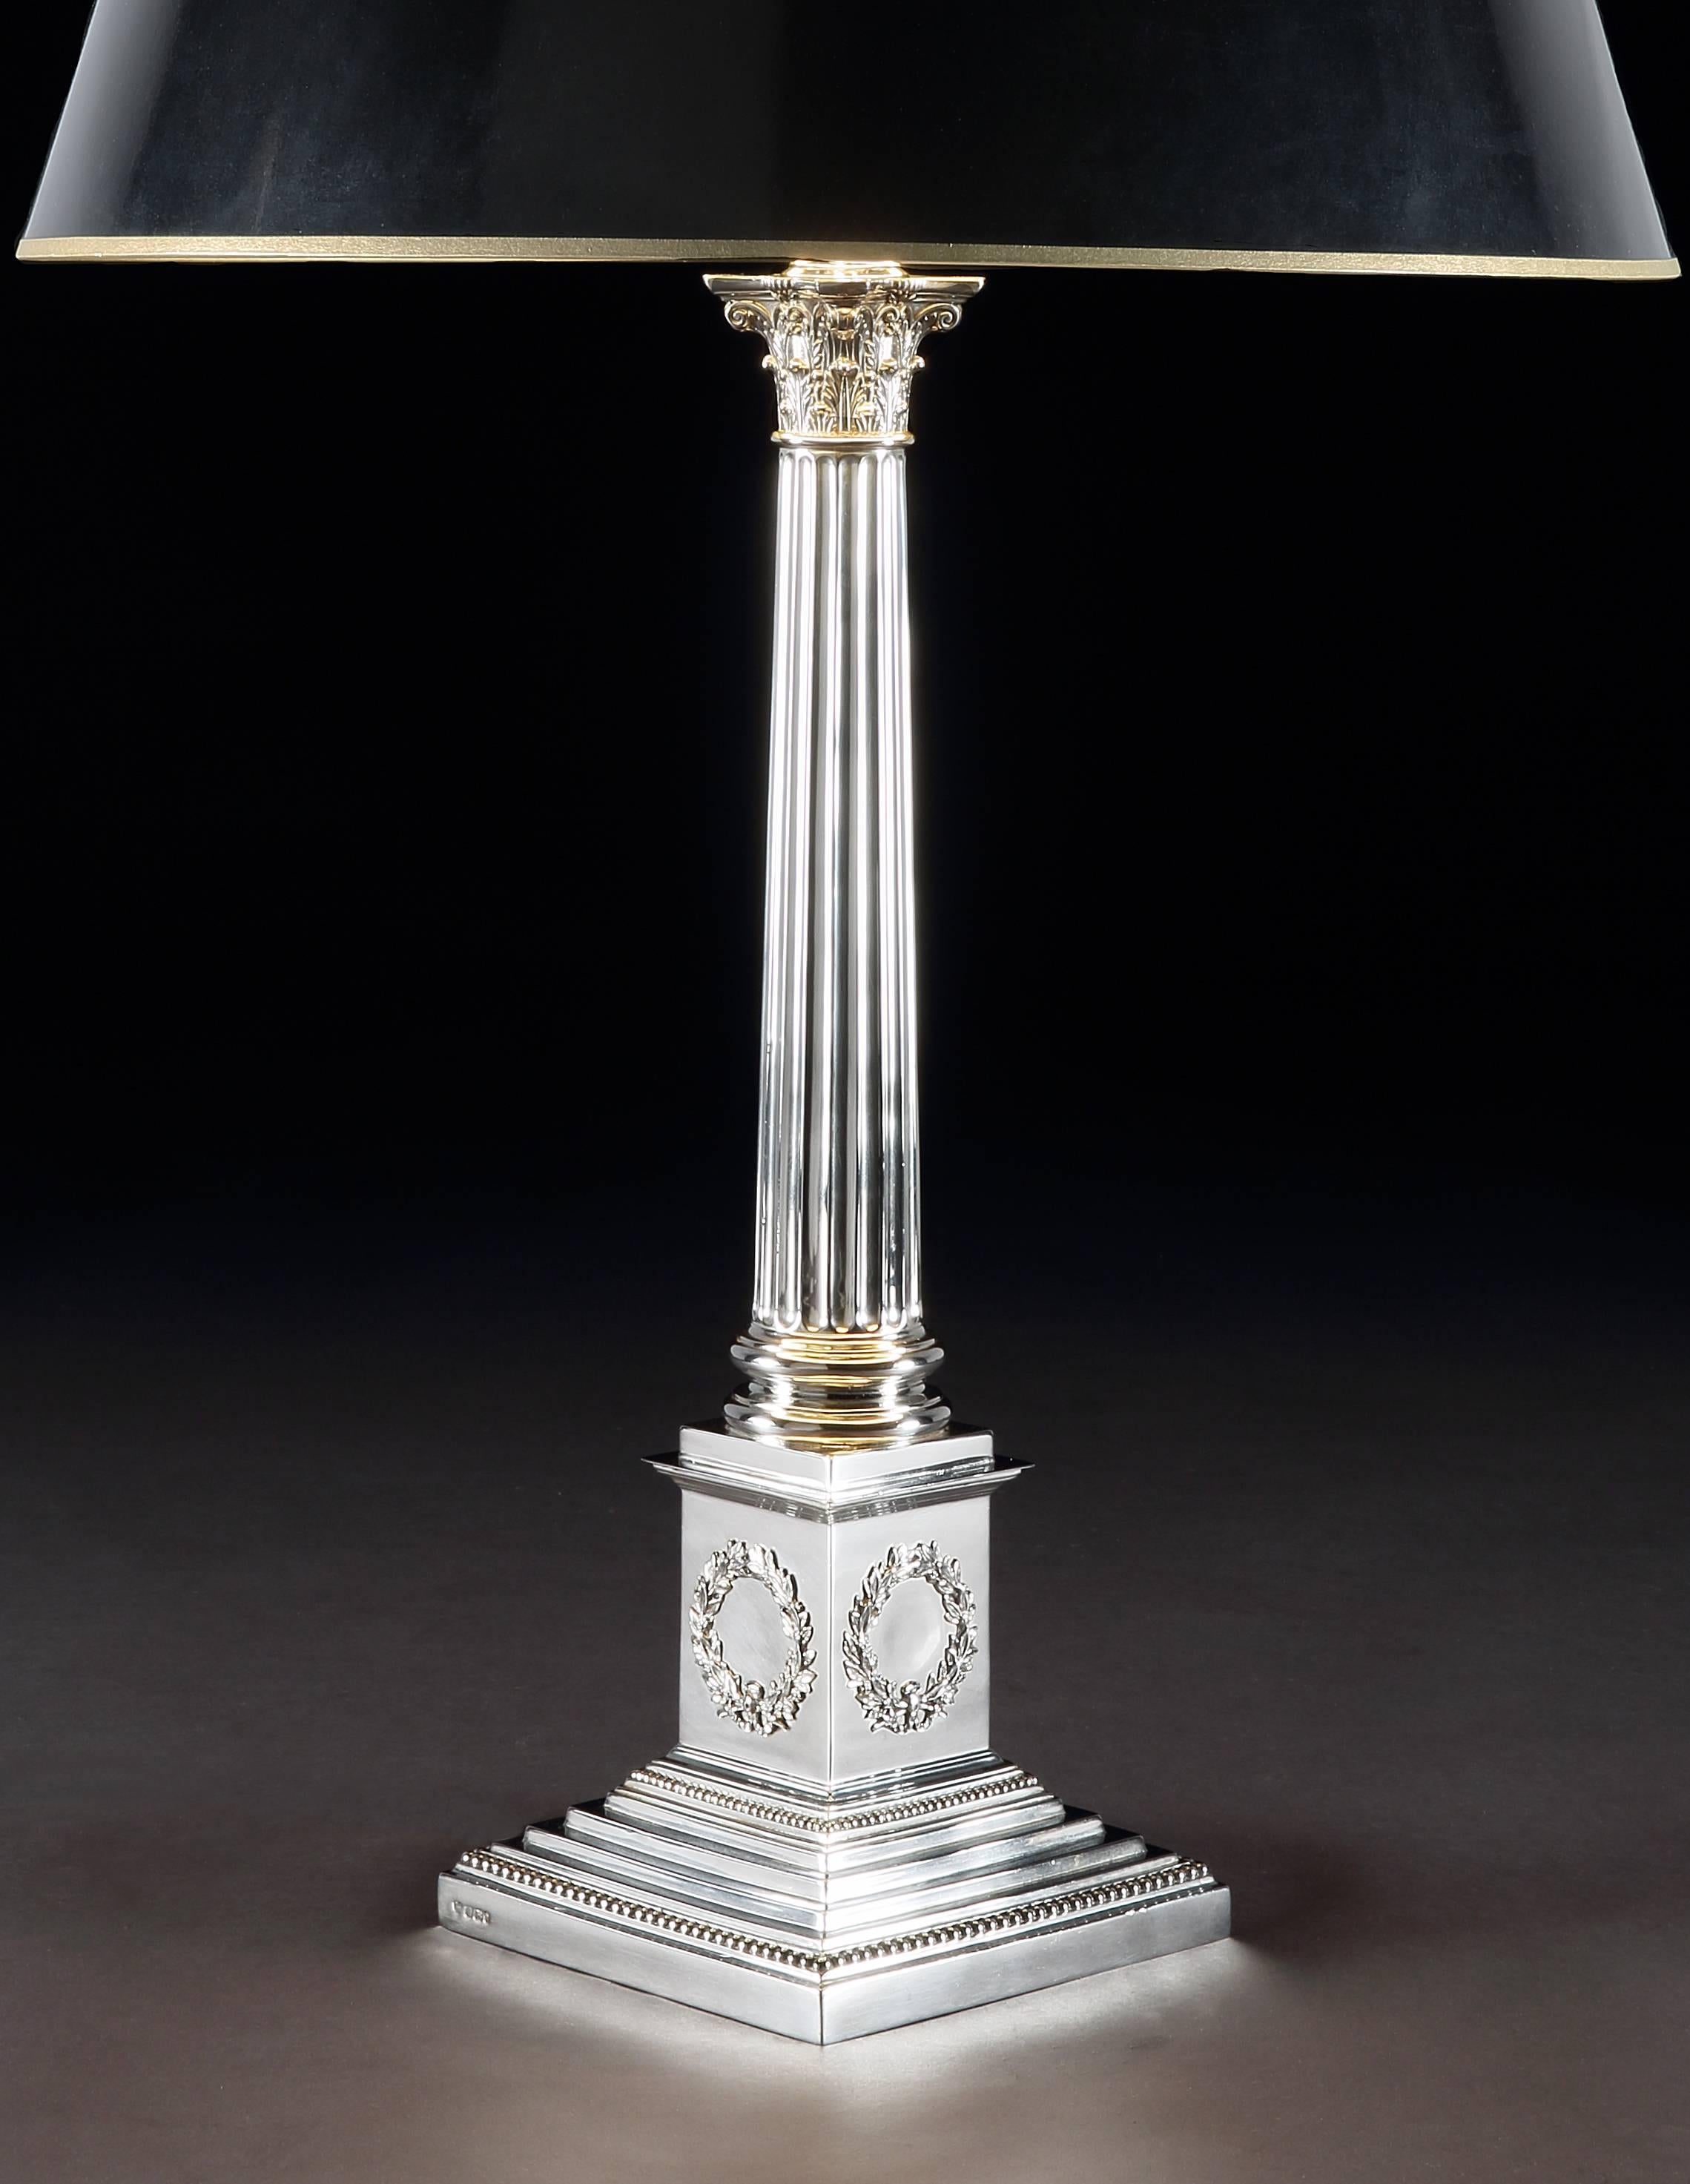 A large and architecturally grand sterling silver table lamp in the form of a Corinthian column, with a tapered reeded stem and decoration of scrolled acanthus leaves to the capital and wreathes applied to each side of the square base. Hallmarked